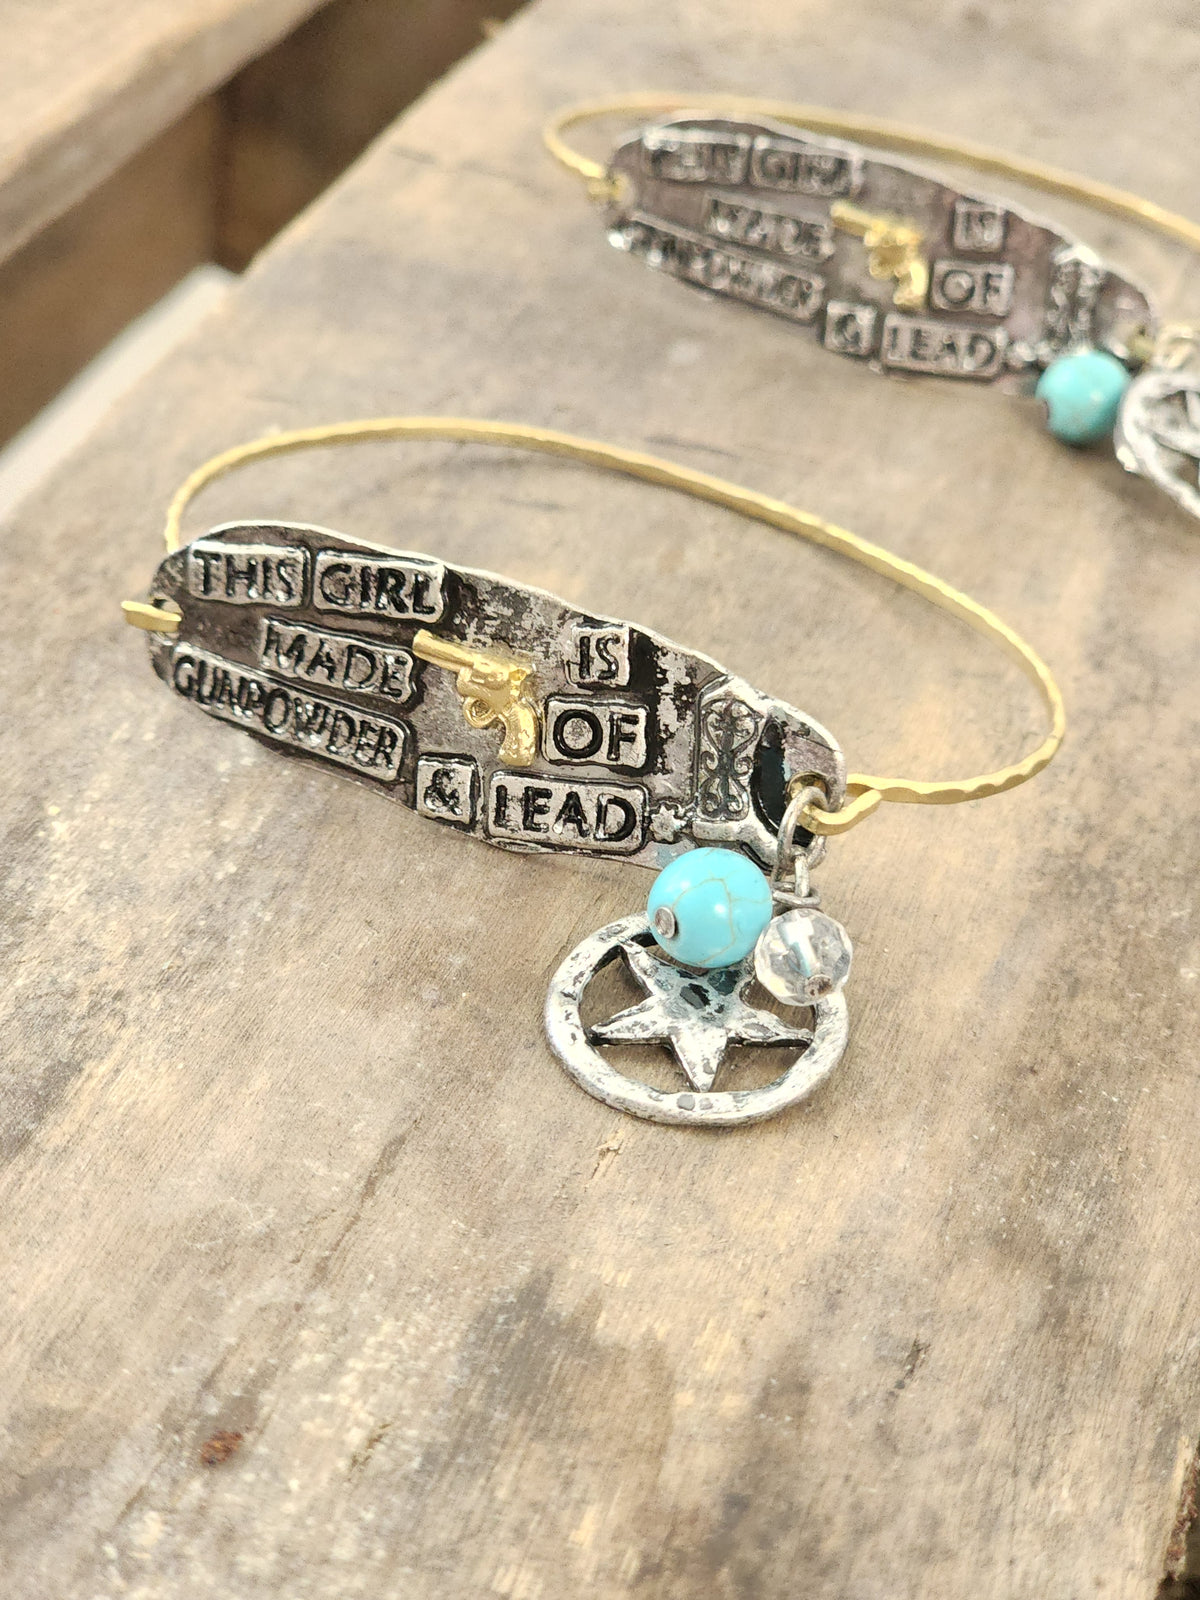 This girl is made of gunpowder and lead stamped bracelet